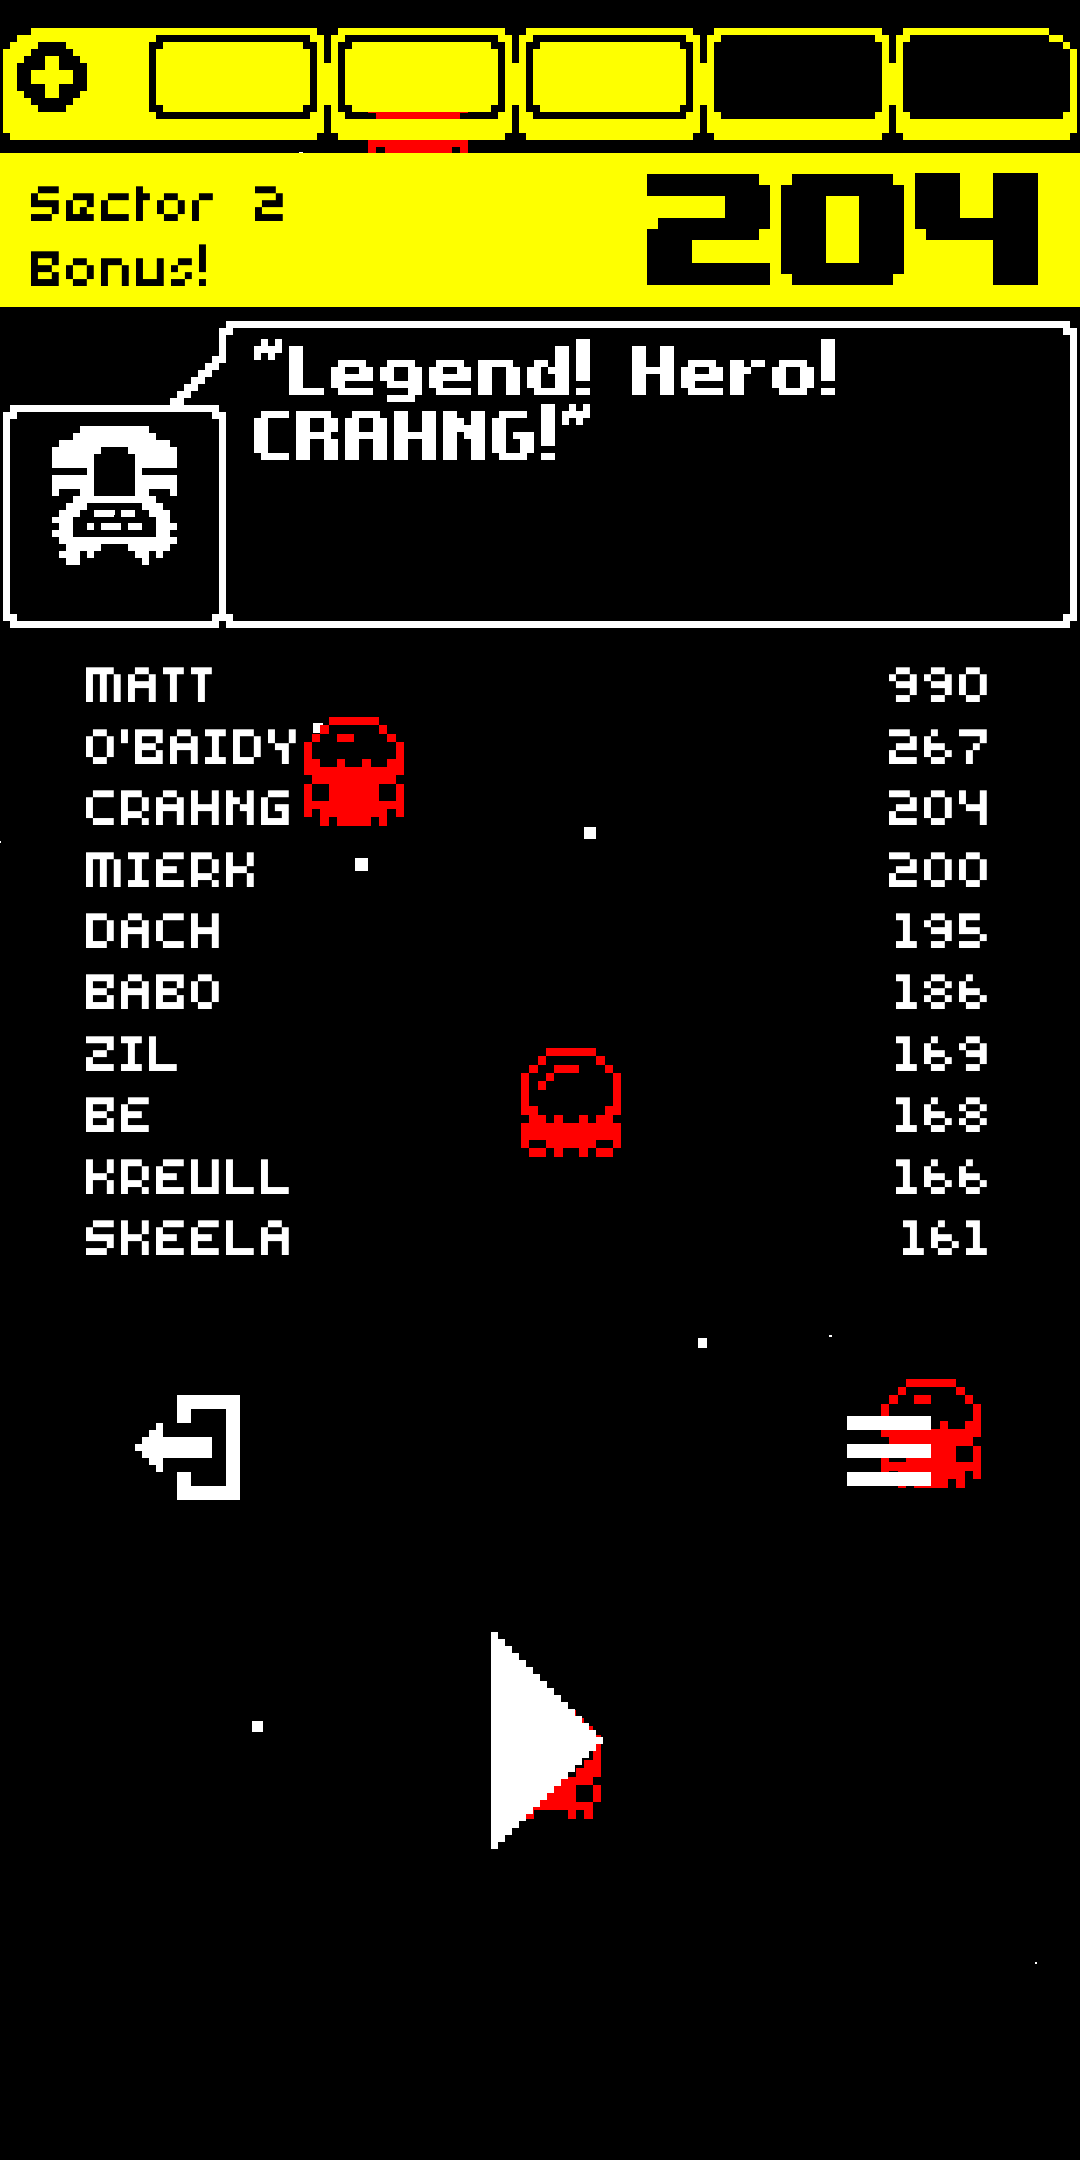 Screenshot: Switch’N’Shoot local leaderboards, showing 267 as my top score